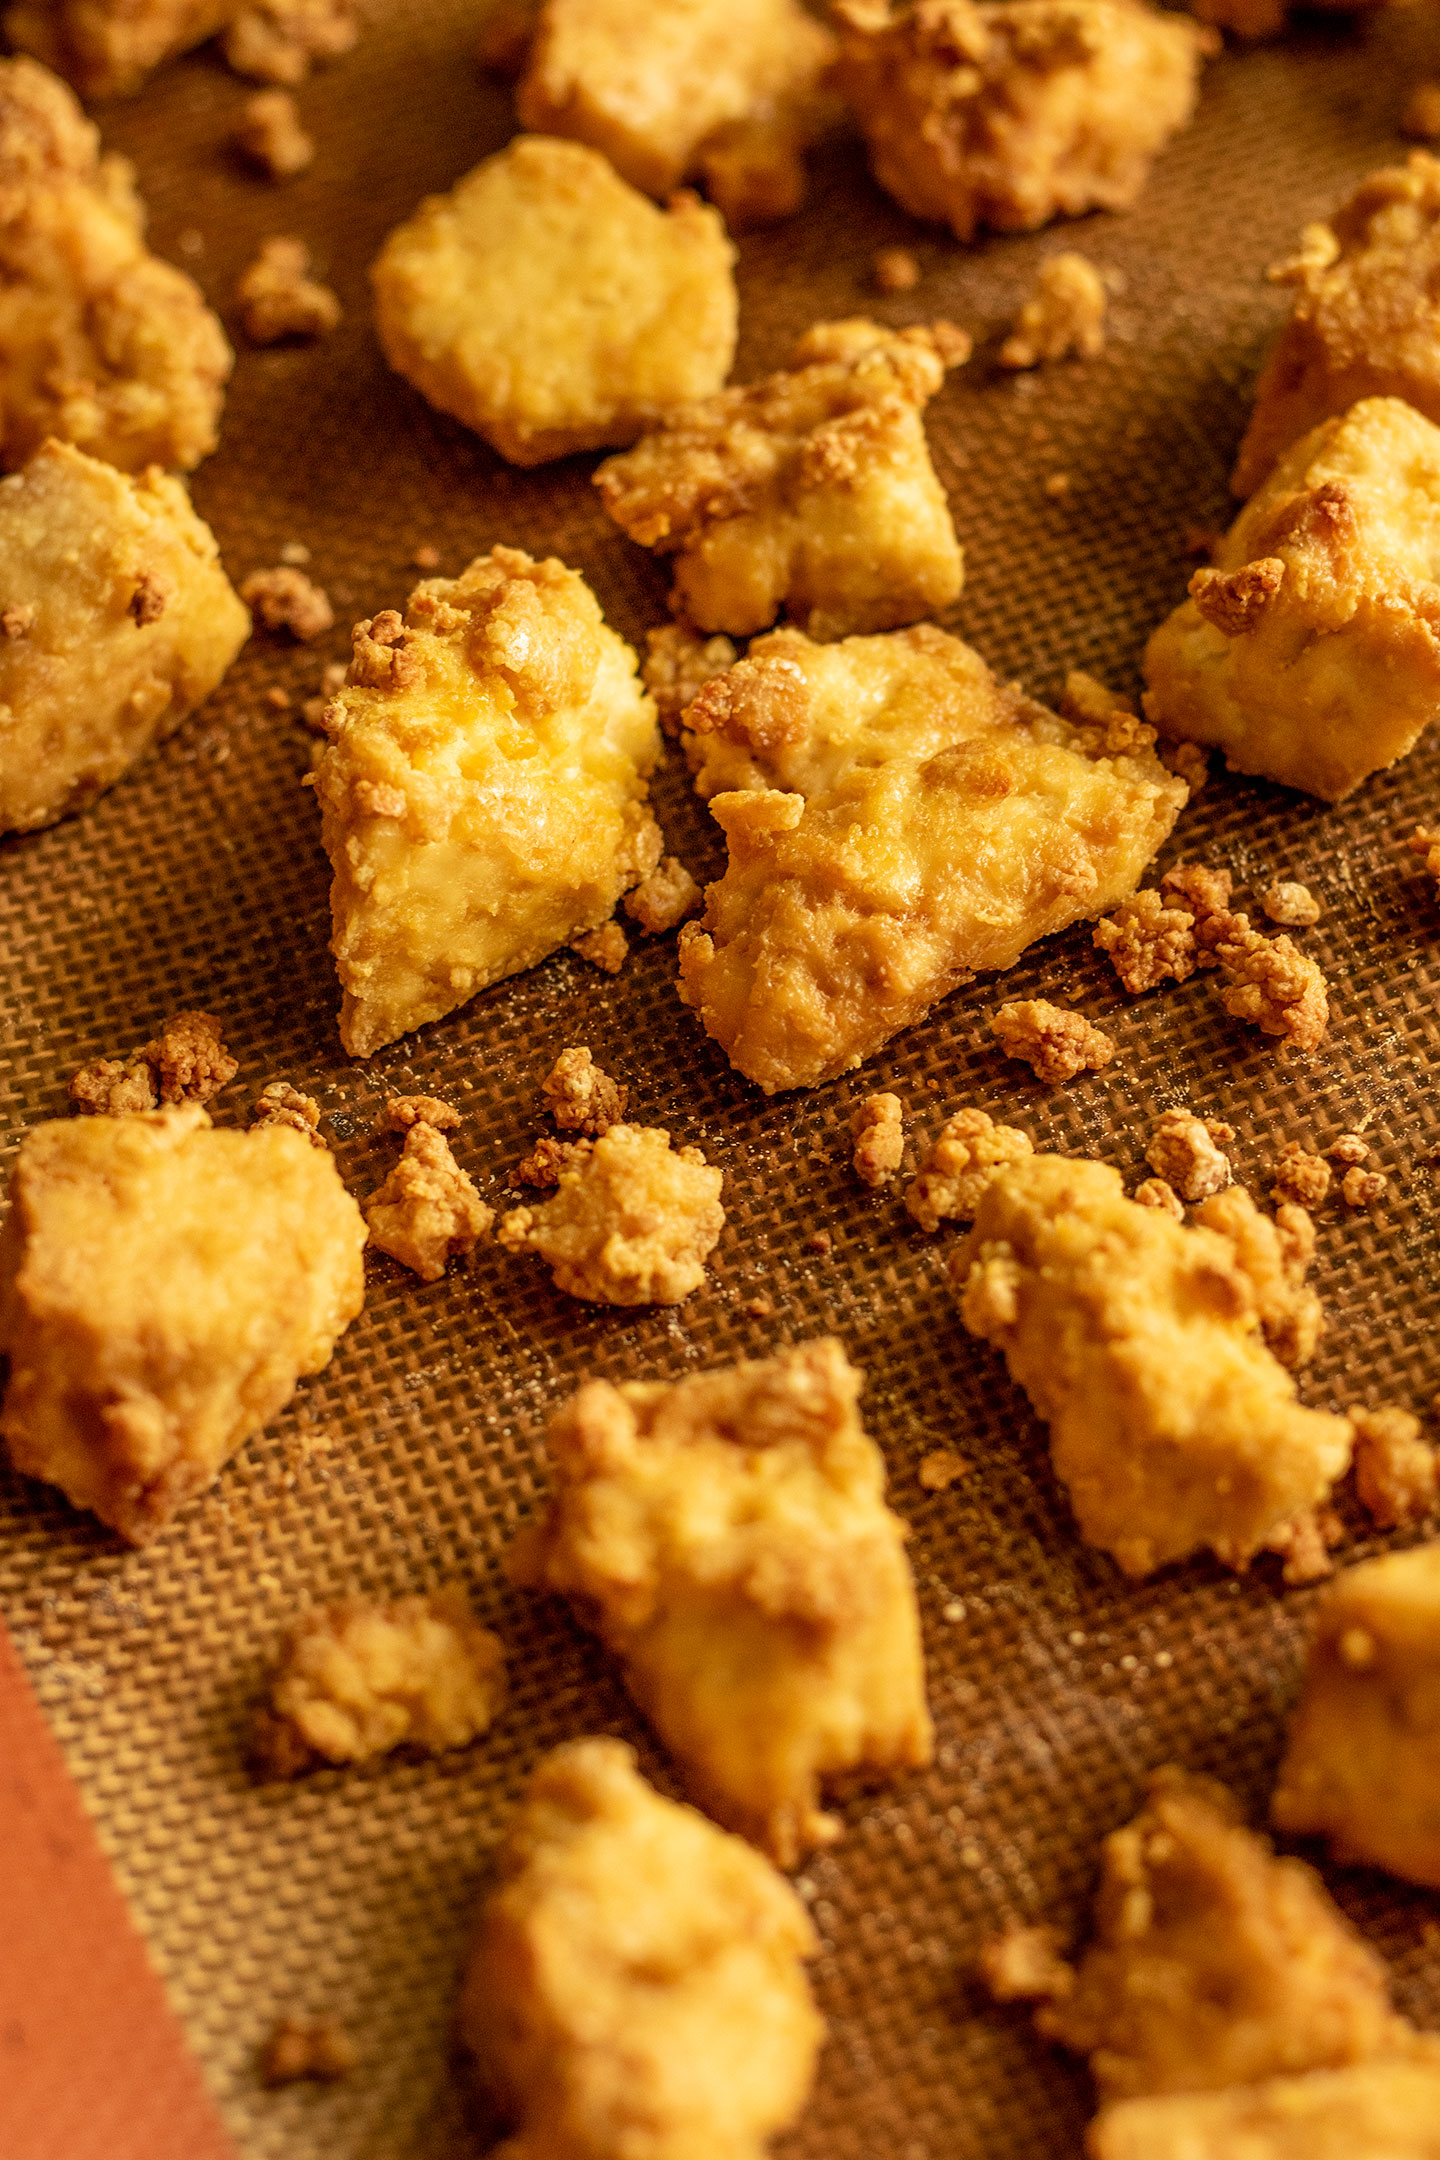 Crispy roasted tofu right out of the oven on a baking tray.